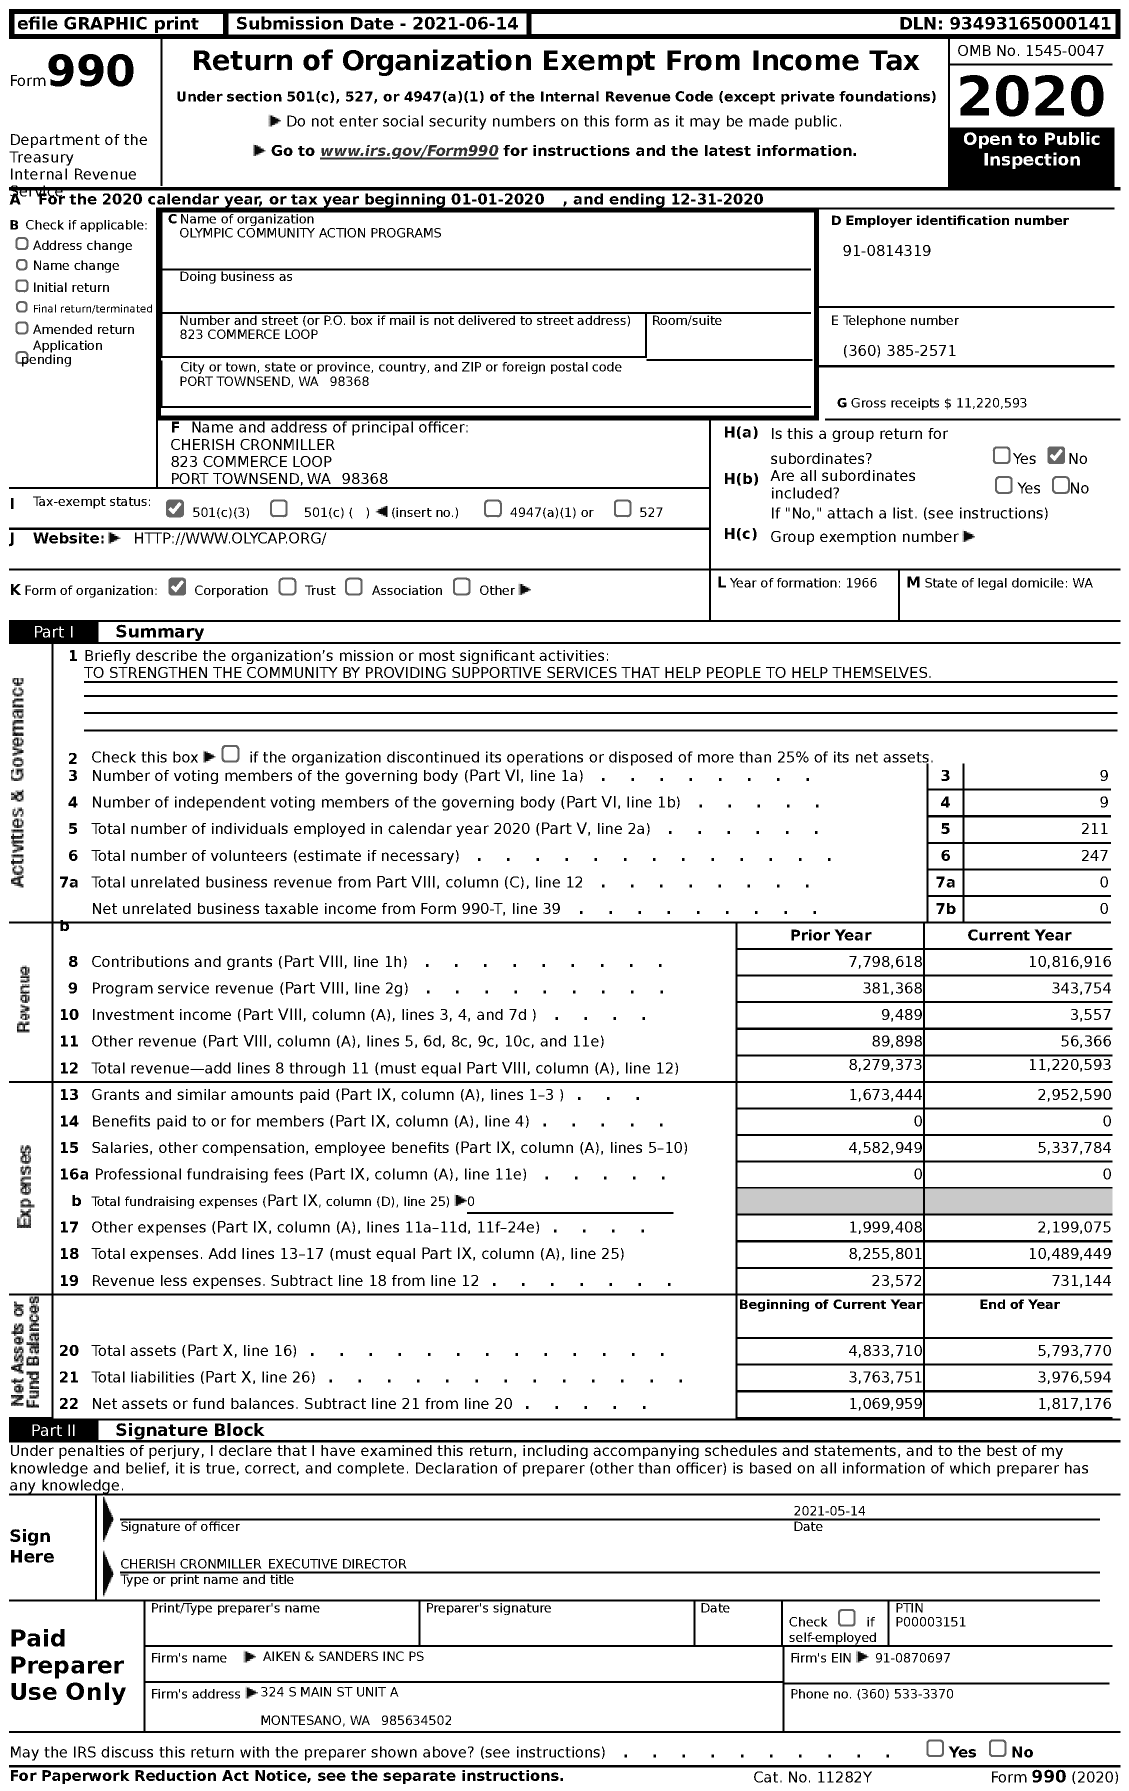 Image of first page of 2020 Form 990 for Olympic Community Action Programs (OlyCAP)